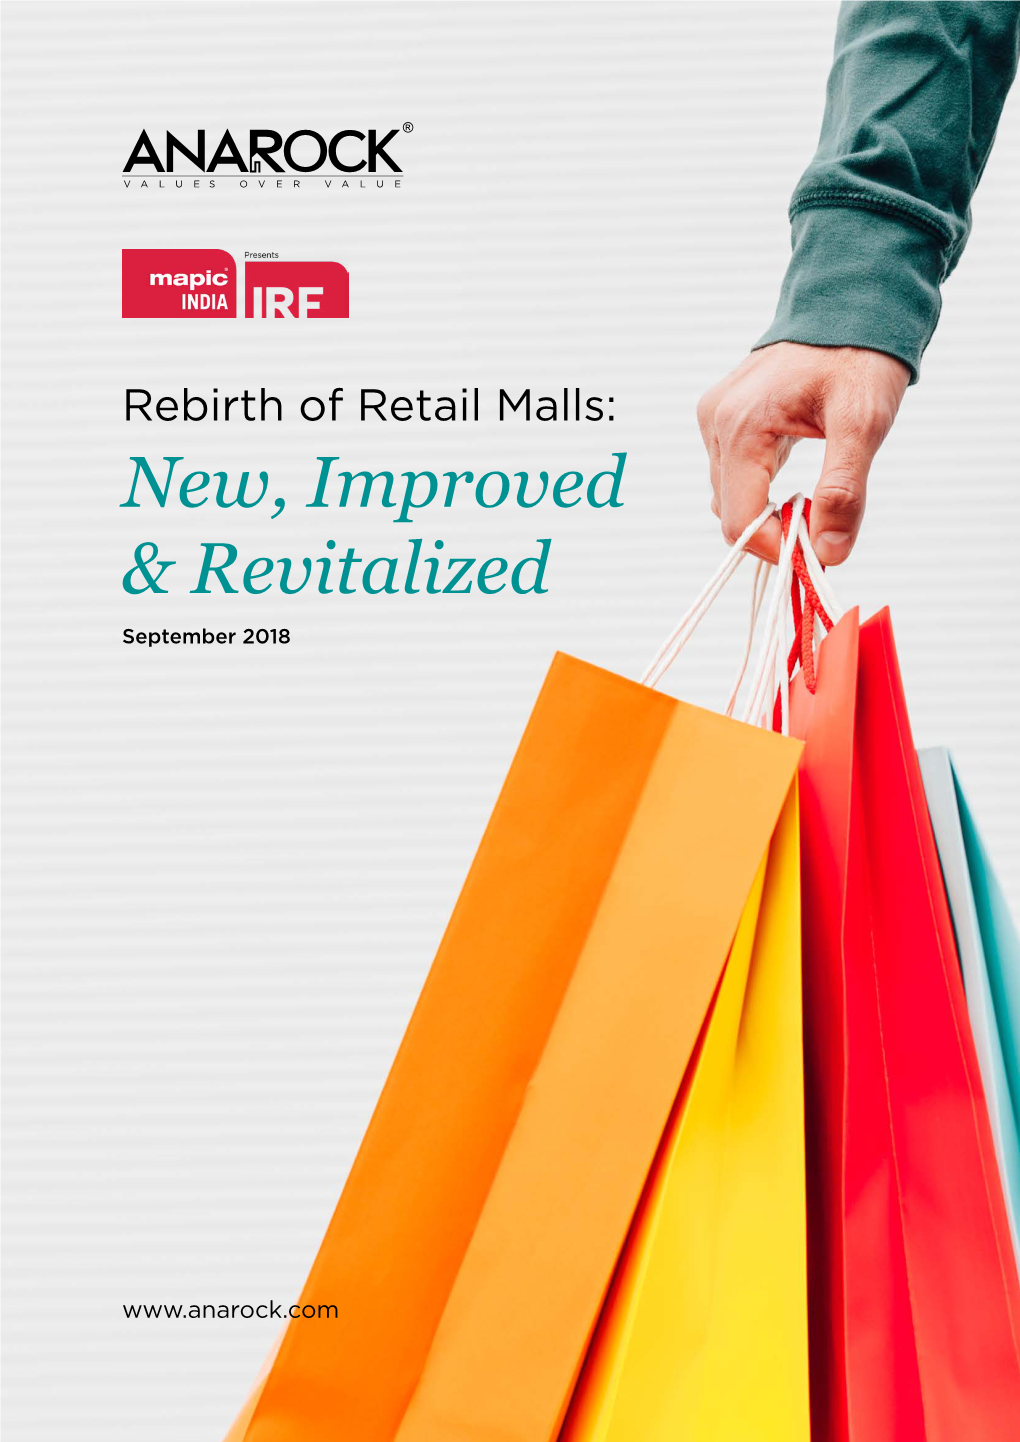 Rebirth of Retail Malls: New, Improved & Revitalized